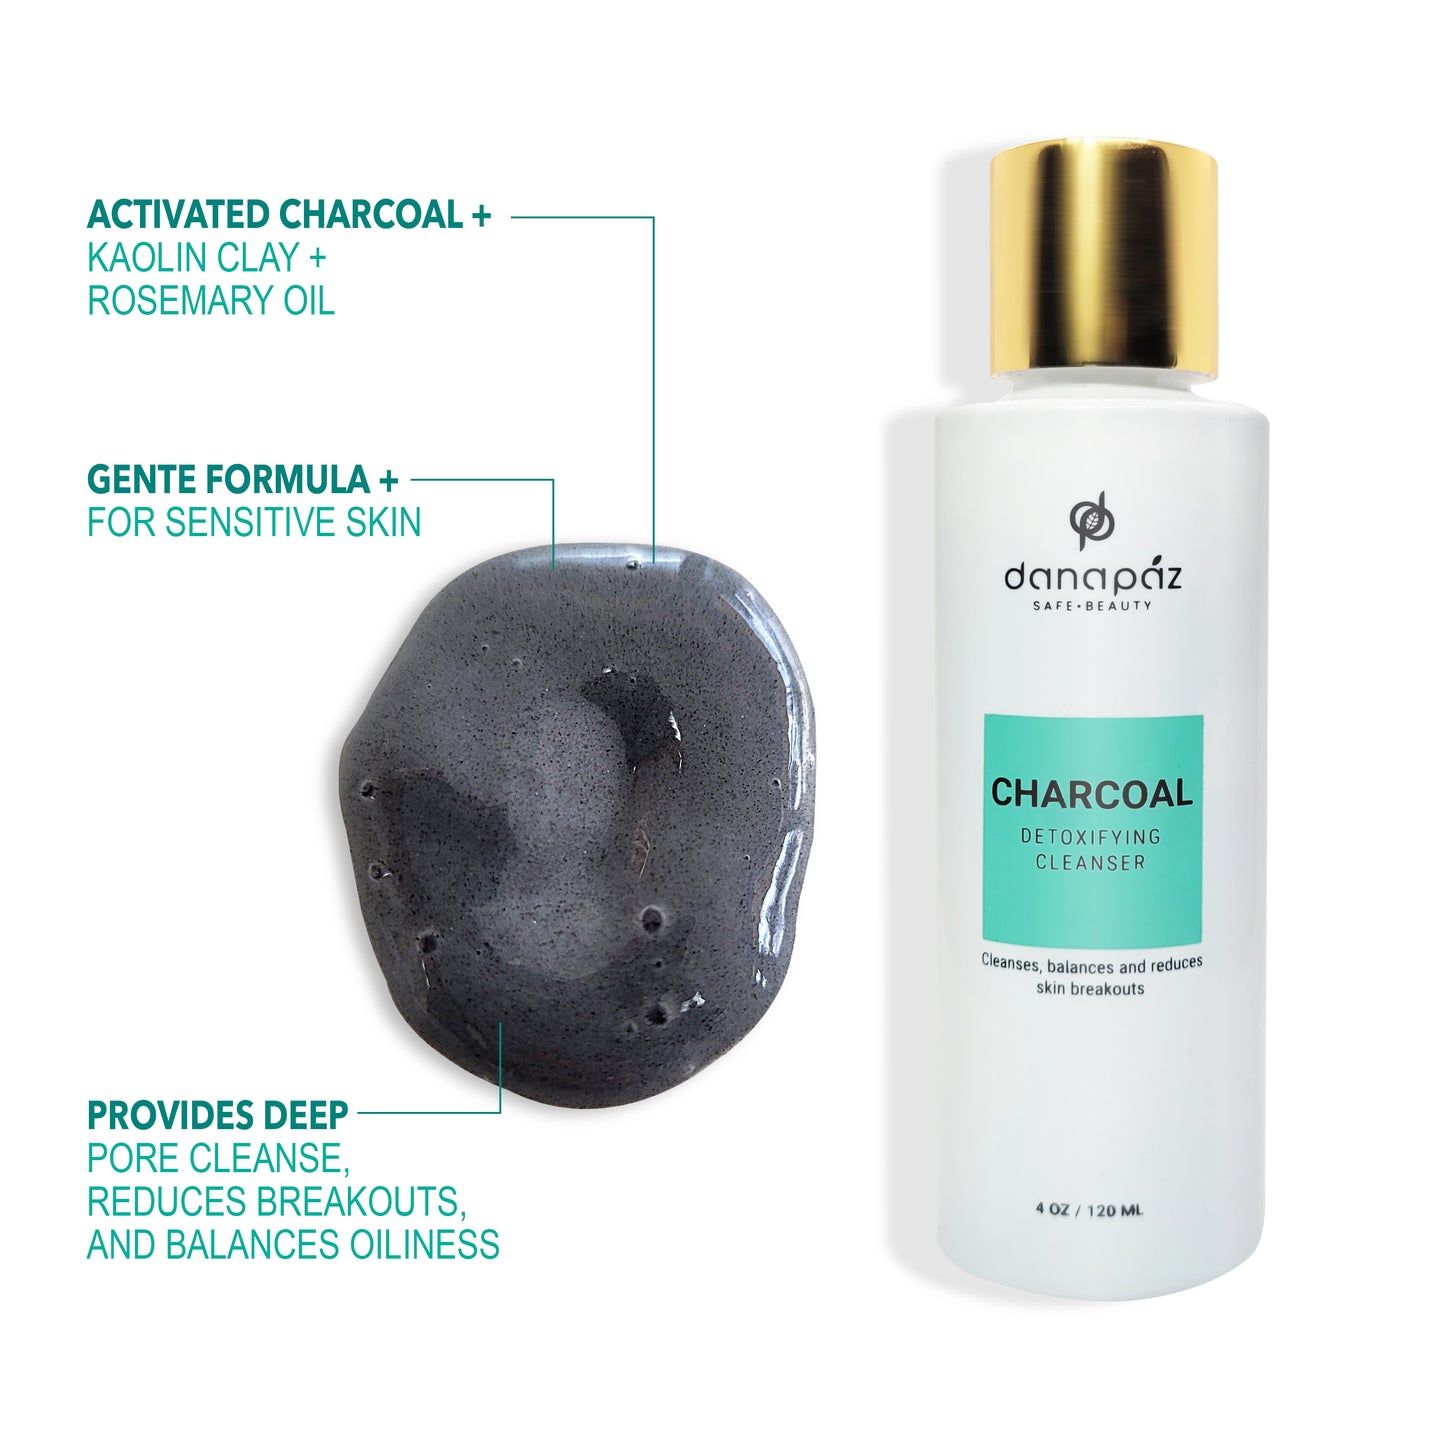 Charcoal Detoxifying Cleanser